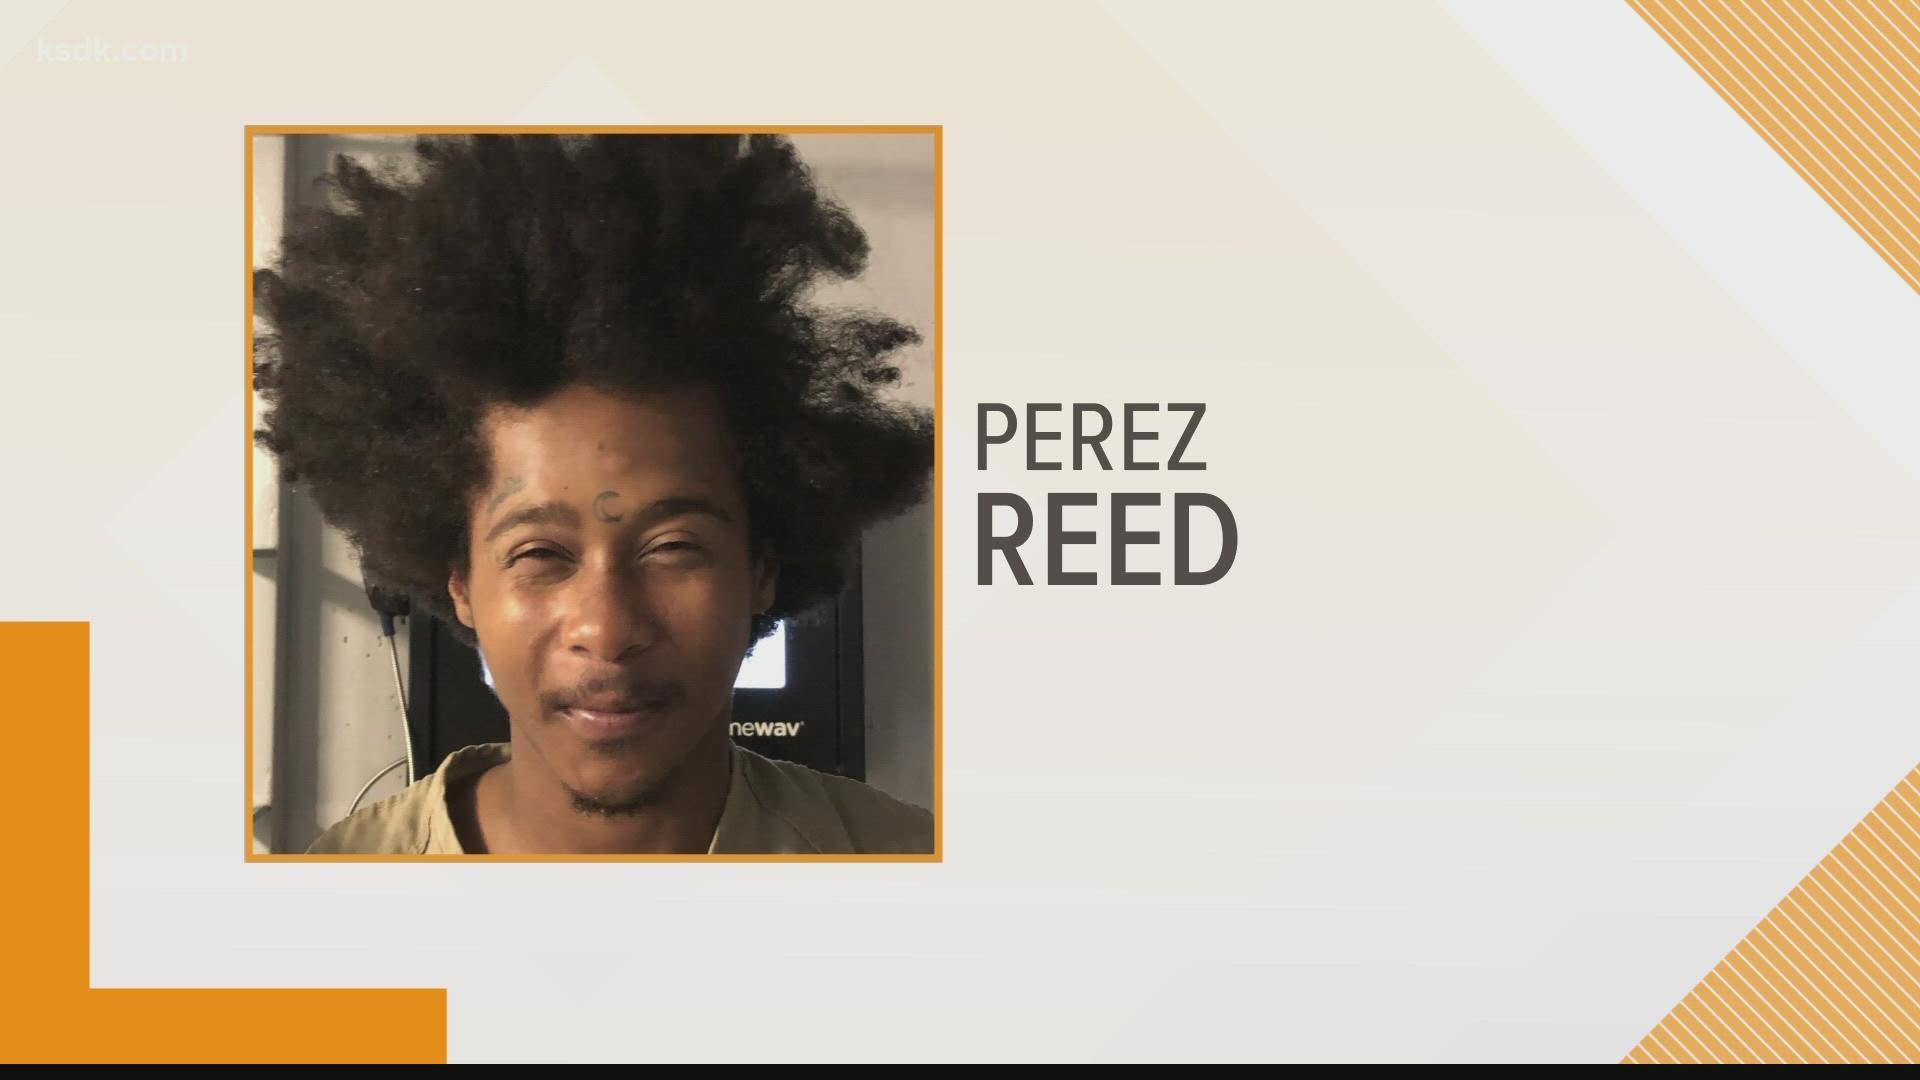 Multiple police sources say 25-year-old Perez Reed is responsible for four connected homicides in the St. Louis area and two in Kansas City, Kansas.